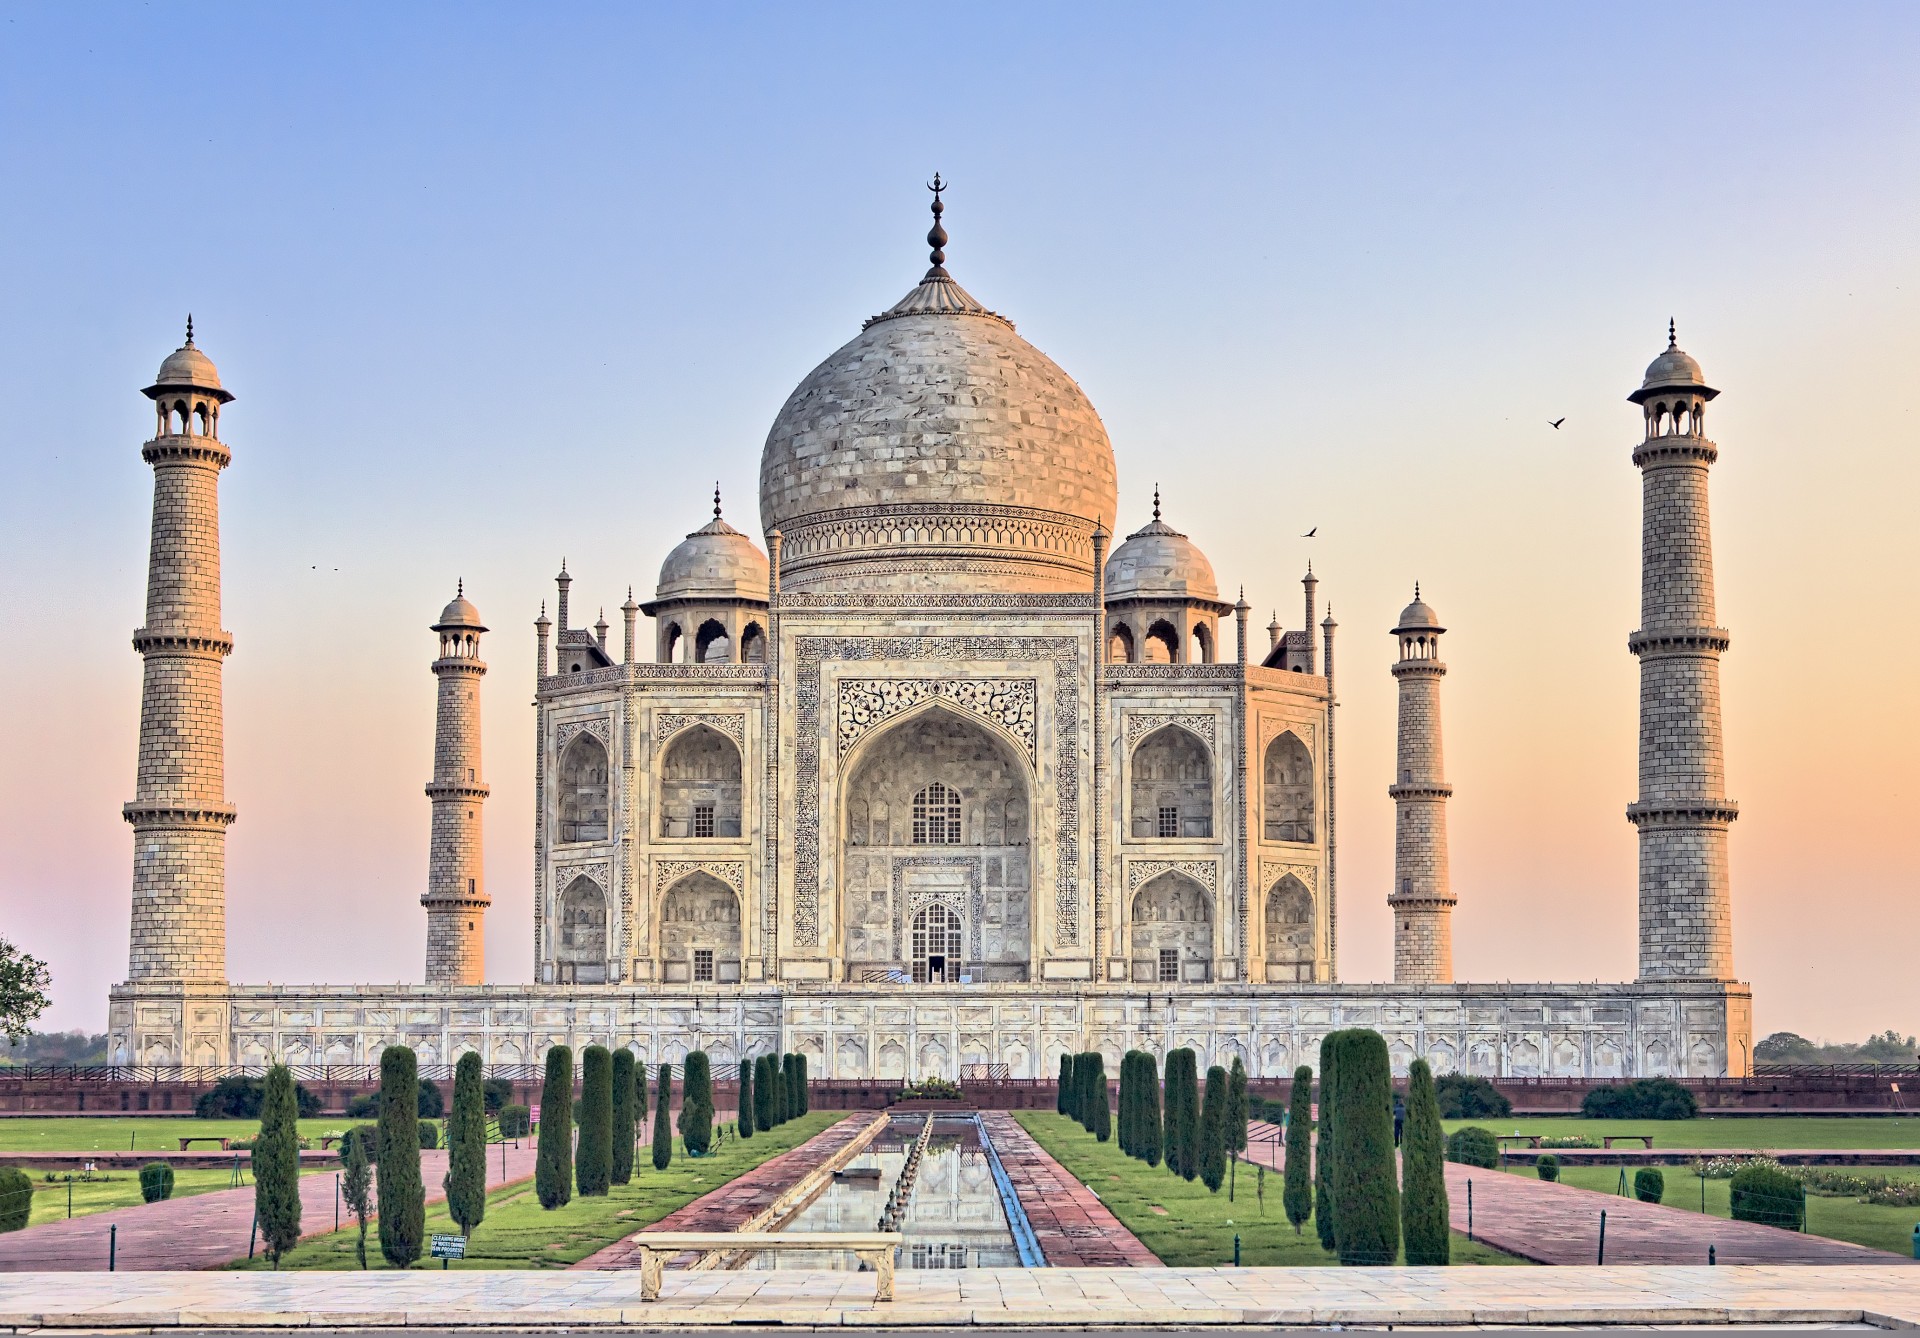 Taj Mahal, the monument threatened by pollution - We Build Value